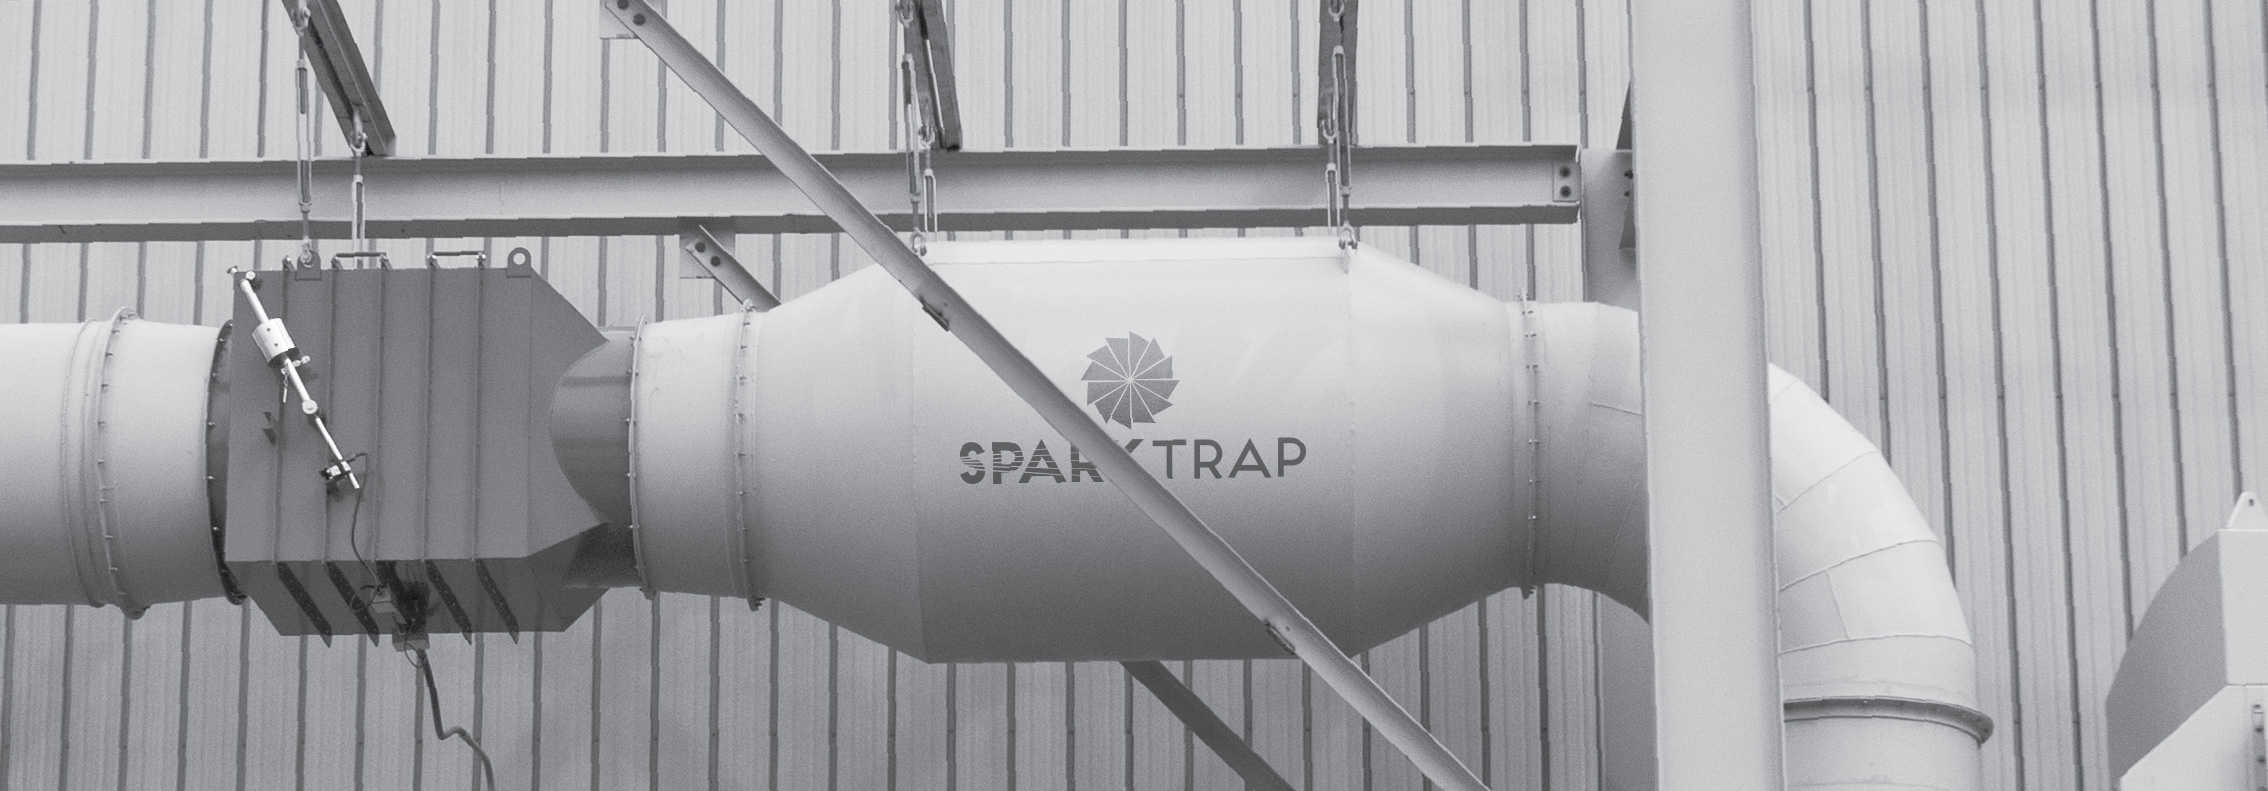 Imperial Systems Spark Trap installed at customer location